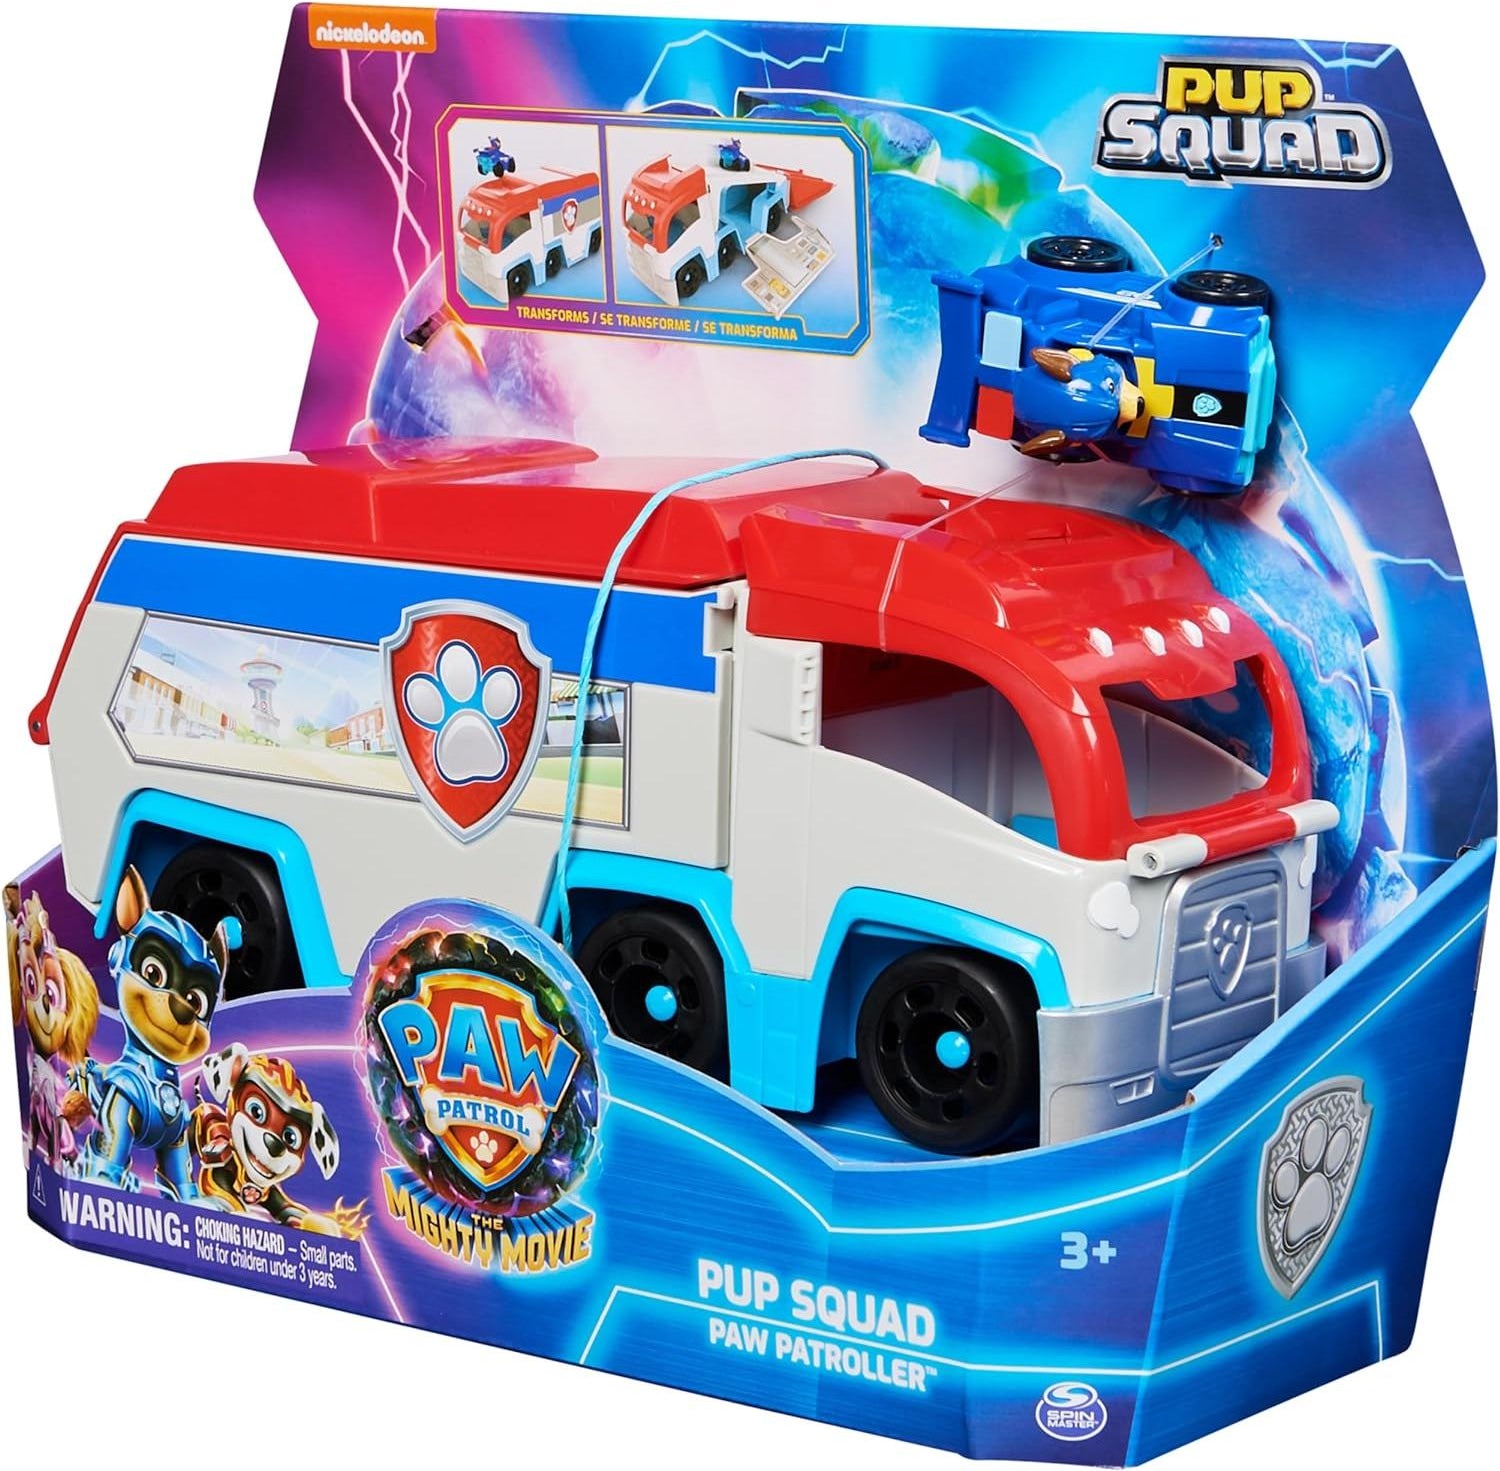 PAW Patrol The Mighty Movie, Pup Squad Patroller